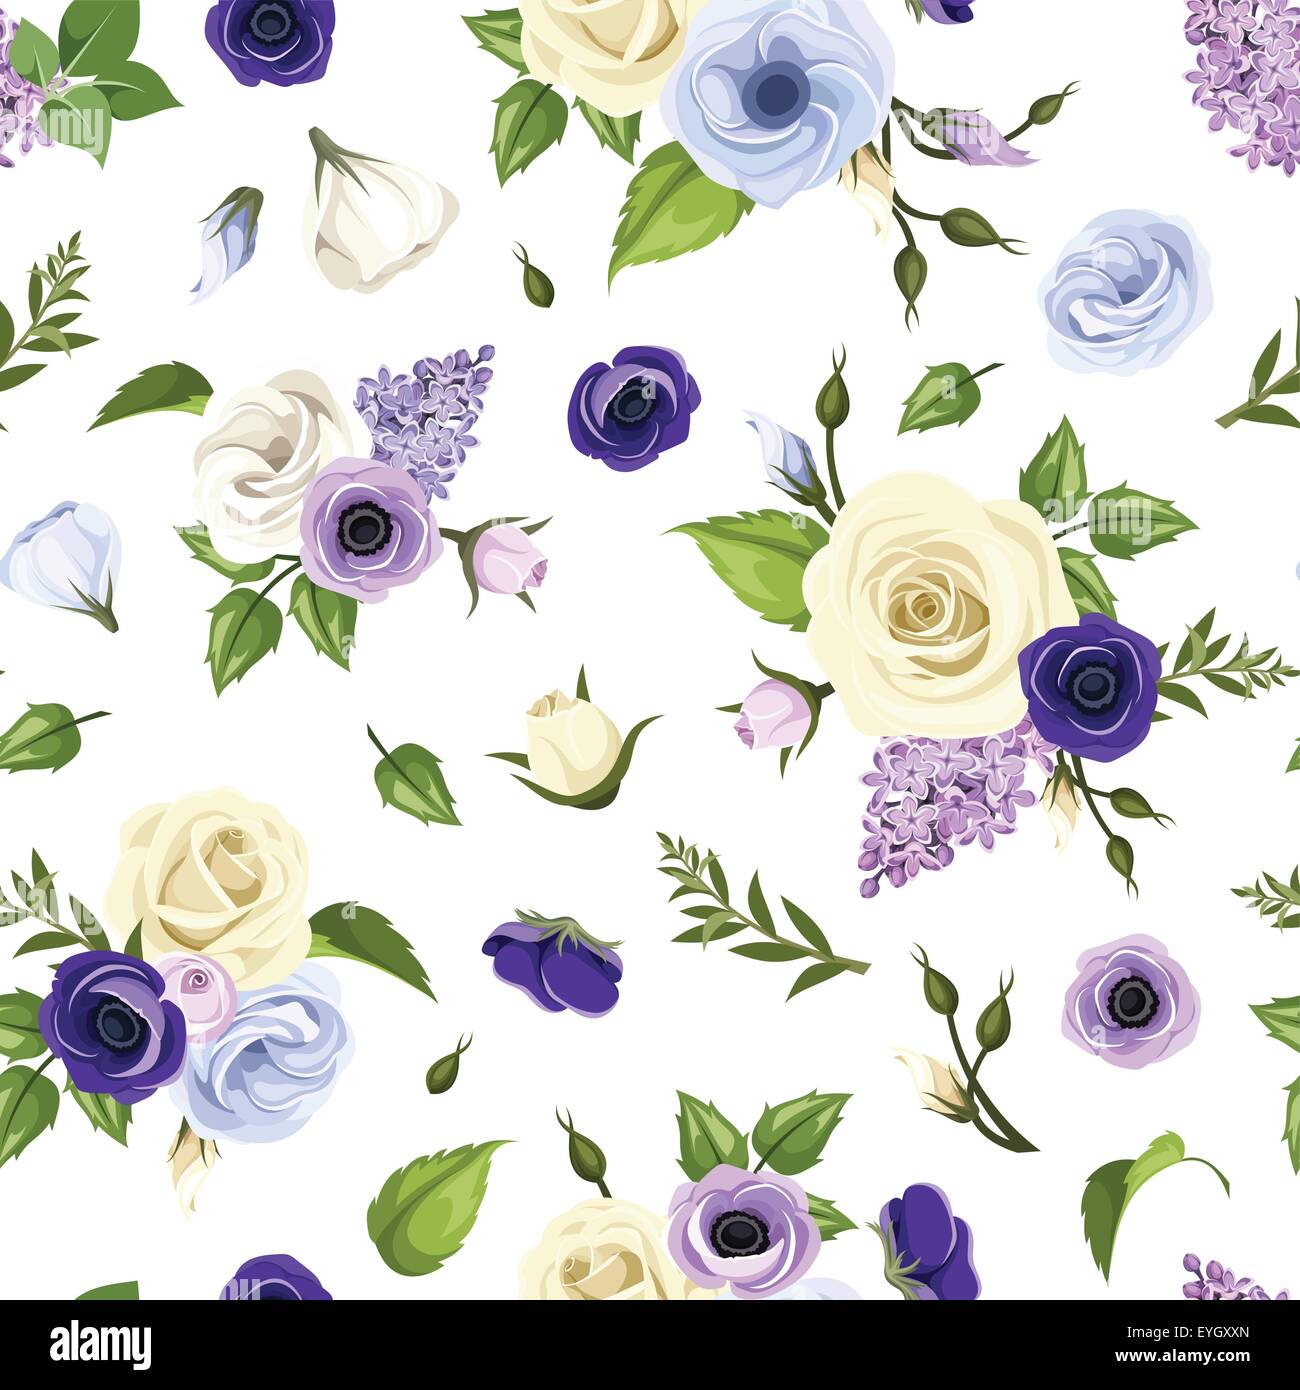 Seamless pattern with blue, purple and white roses, lisianthuses, anemones and lilac flowers. Vector illustration. Stock Vector